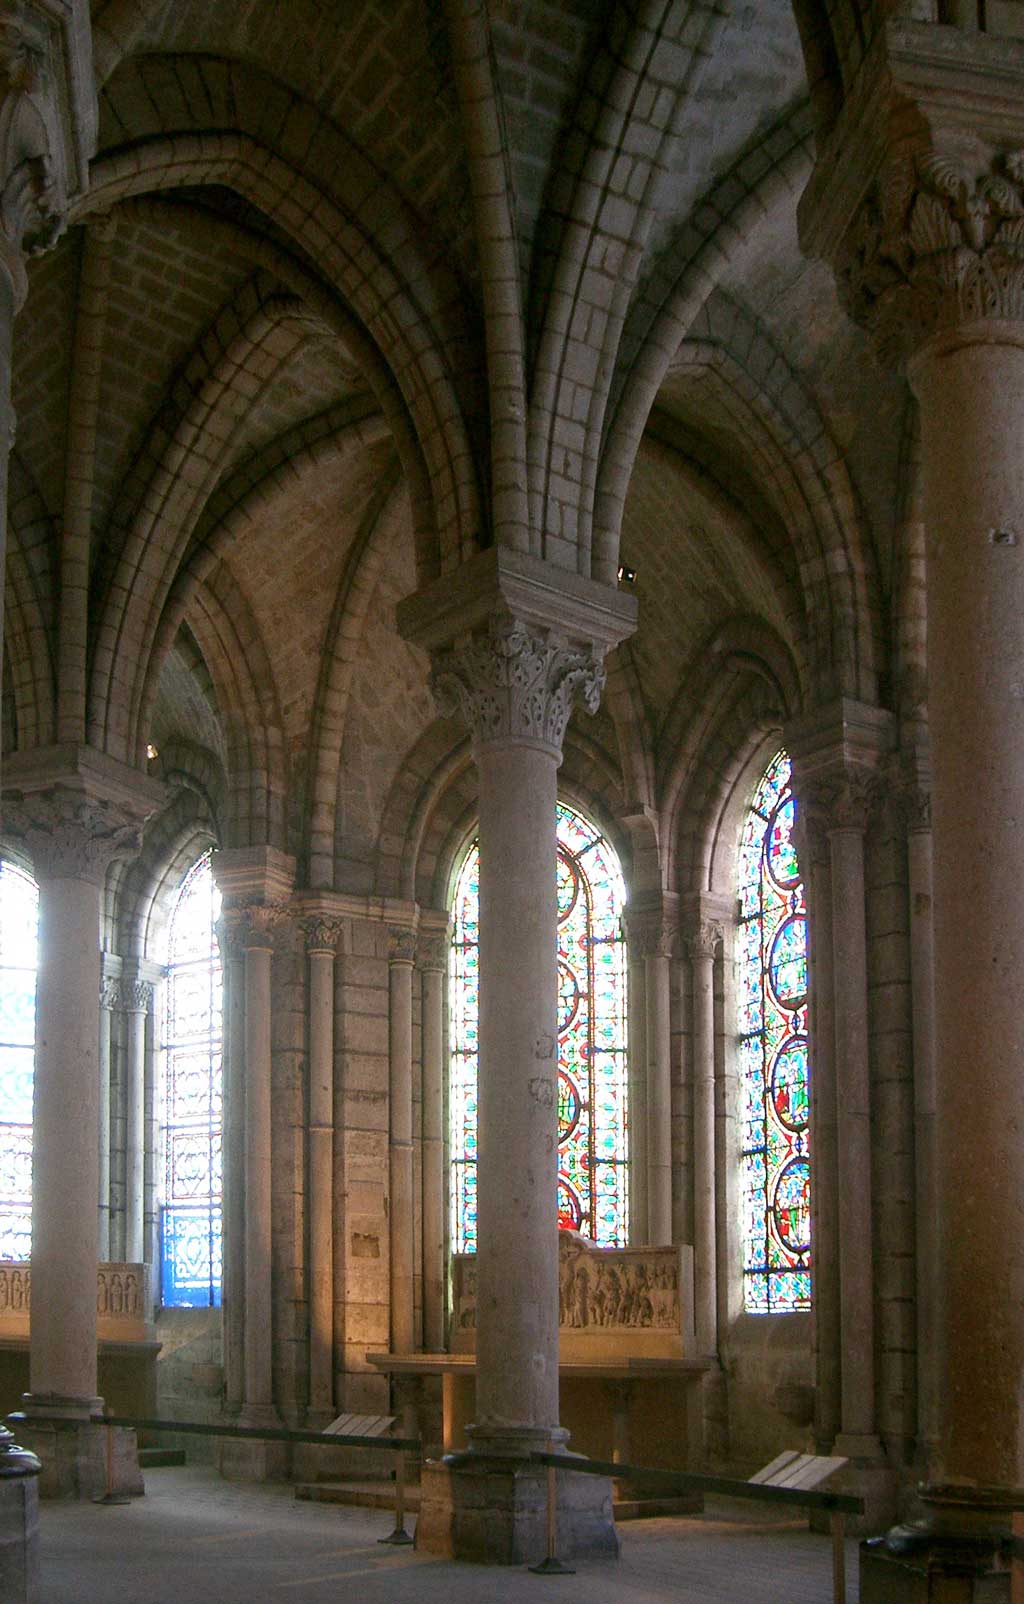 The ambulatory at St. Denis depicting two columns behind which lie the chapels of the cathedral.